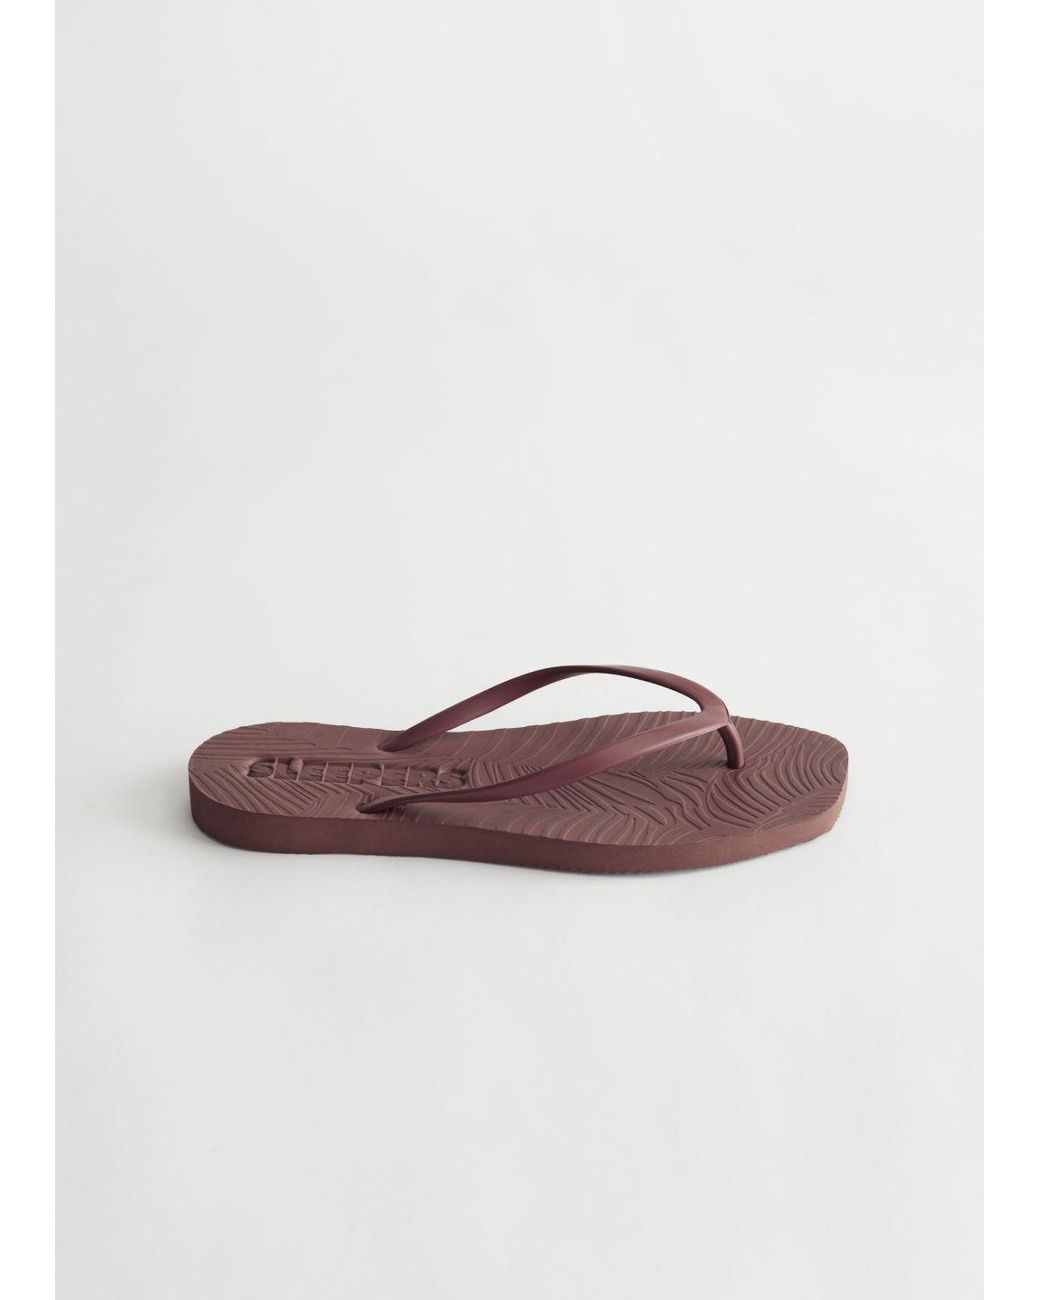 & Other Stories Rubber Sleepers Tapered Flip Flops in Brown - Lyst